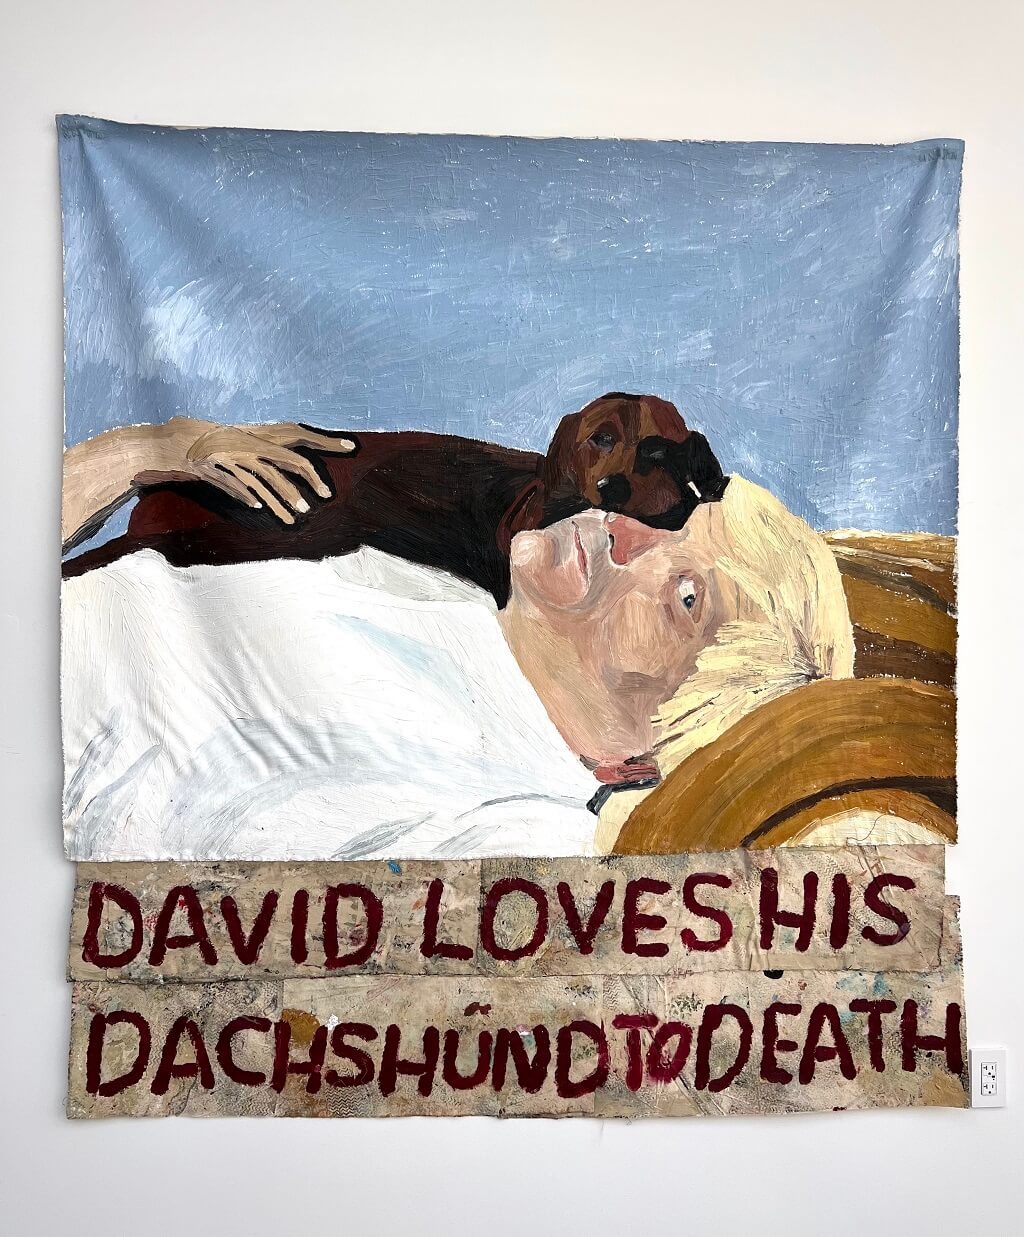 Sophie Barber. David Loves his Dachshund to Death, 2022. The Hornik Collection, San Francisco.